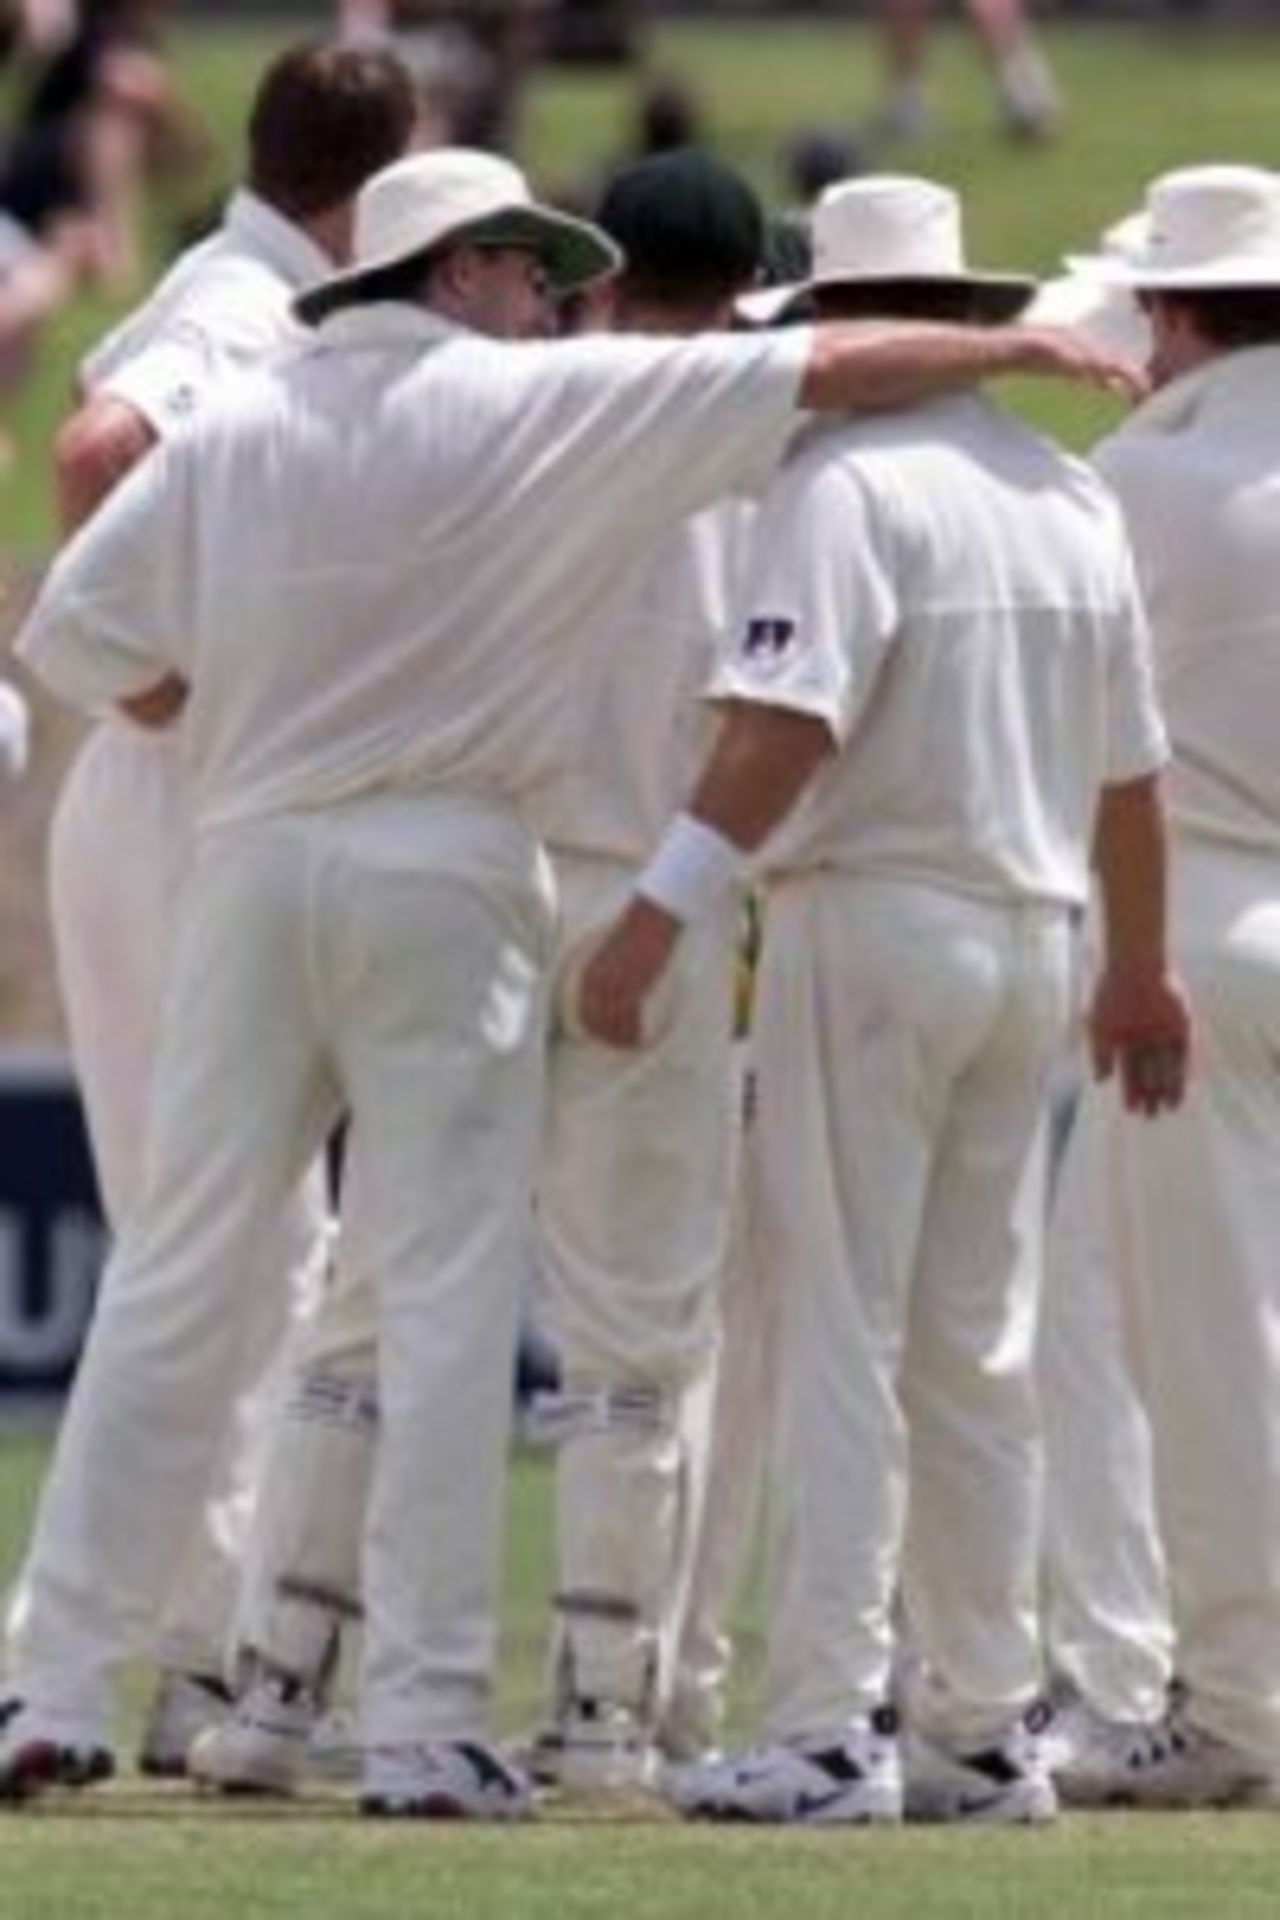 14 Dec 1999: Damien Fleming of Australia consoles Shane Warne after Warne dropped a catch off Fleming's bowling that would have given him a hat trick, on day five of the first test between Australia and India, at the Adelaide Oval, Adelaide, Australia. Australia won by 285 runs.